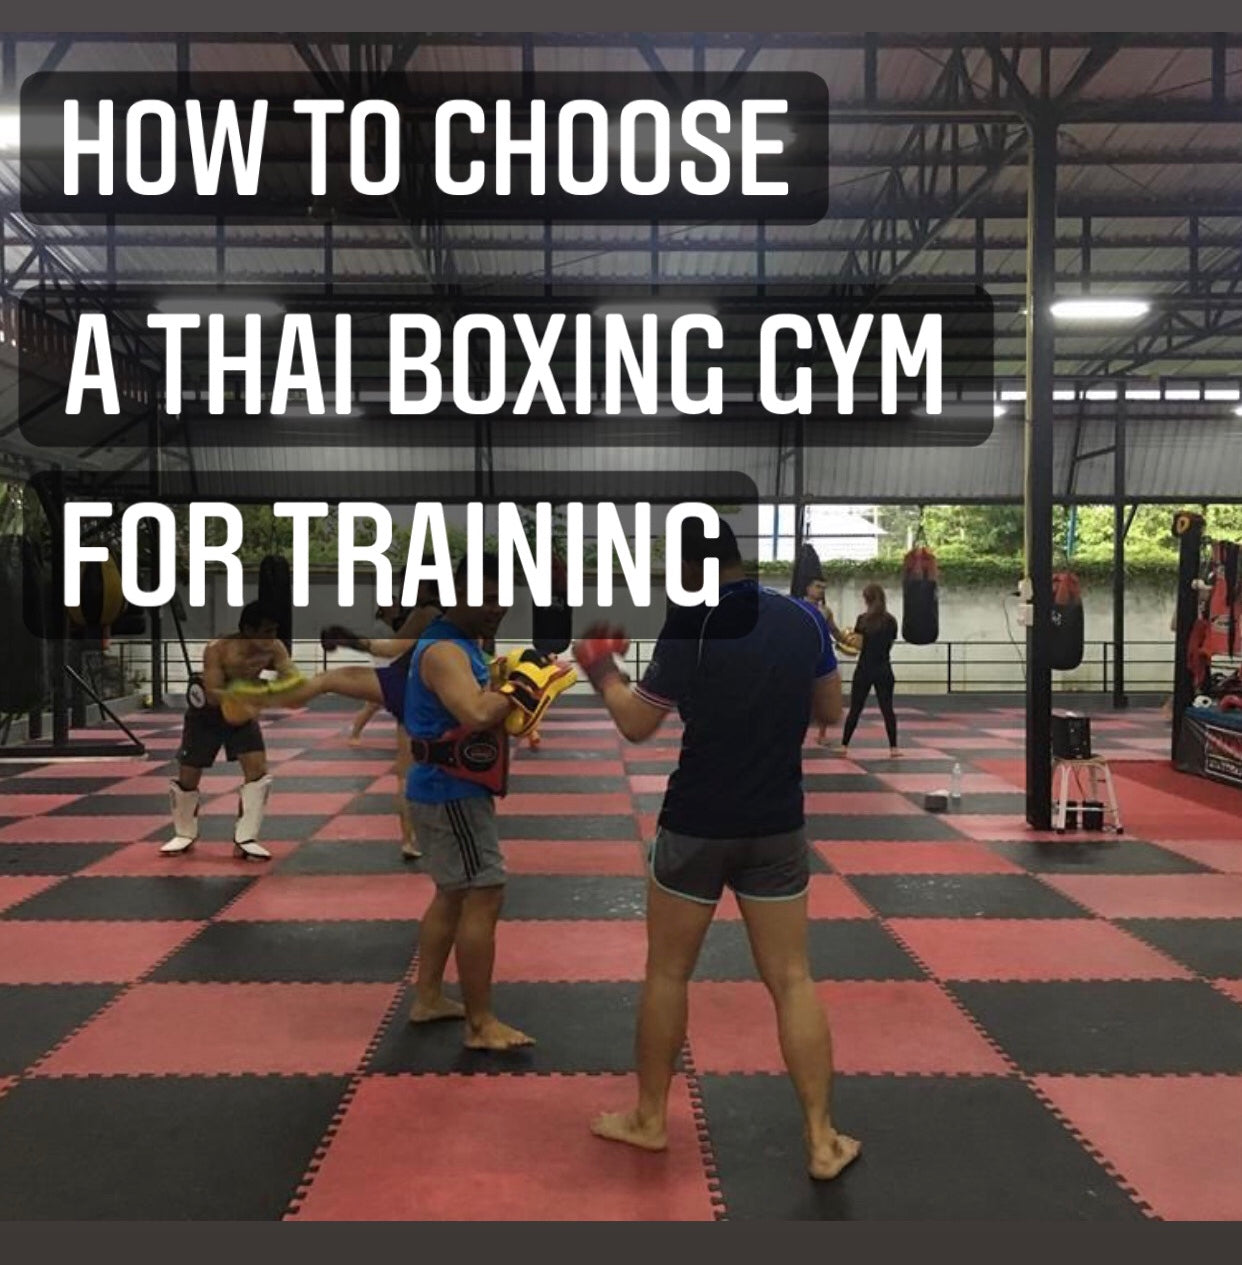 How to choose a Thai boxing gym for training.